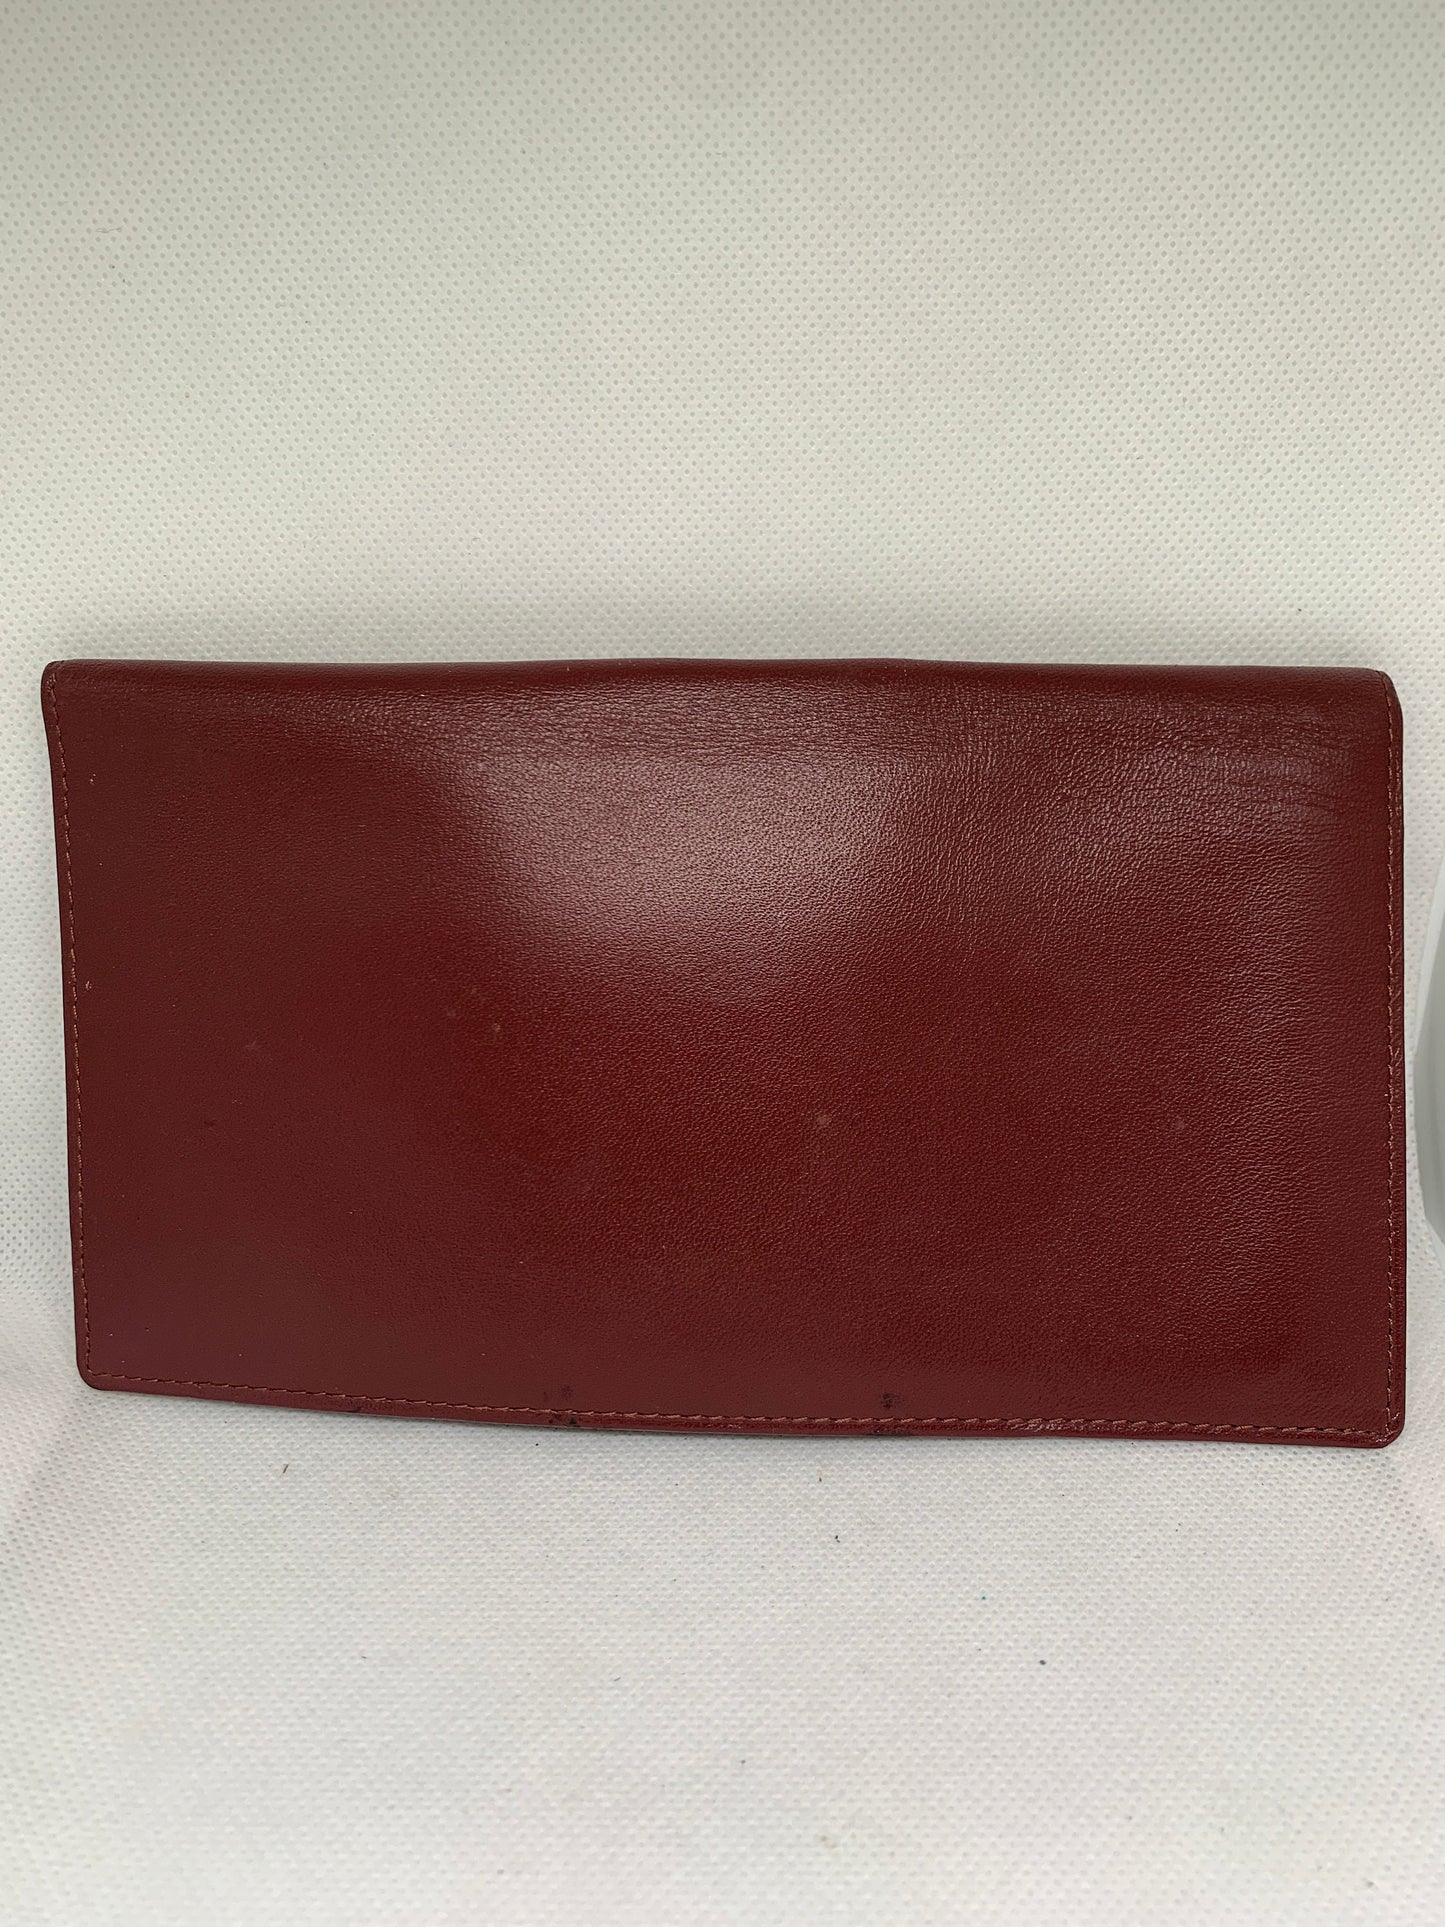 Authentic Cartier Wallet Card holder 7.5" x 4" - 30MAR22